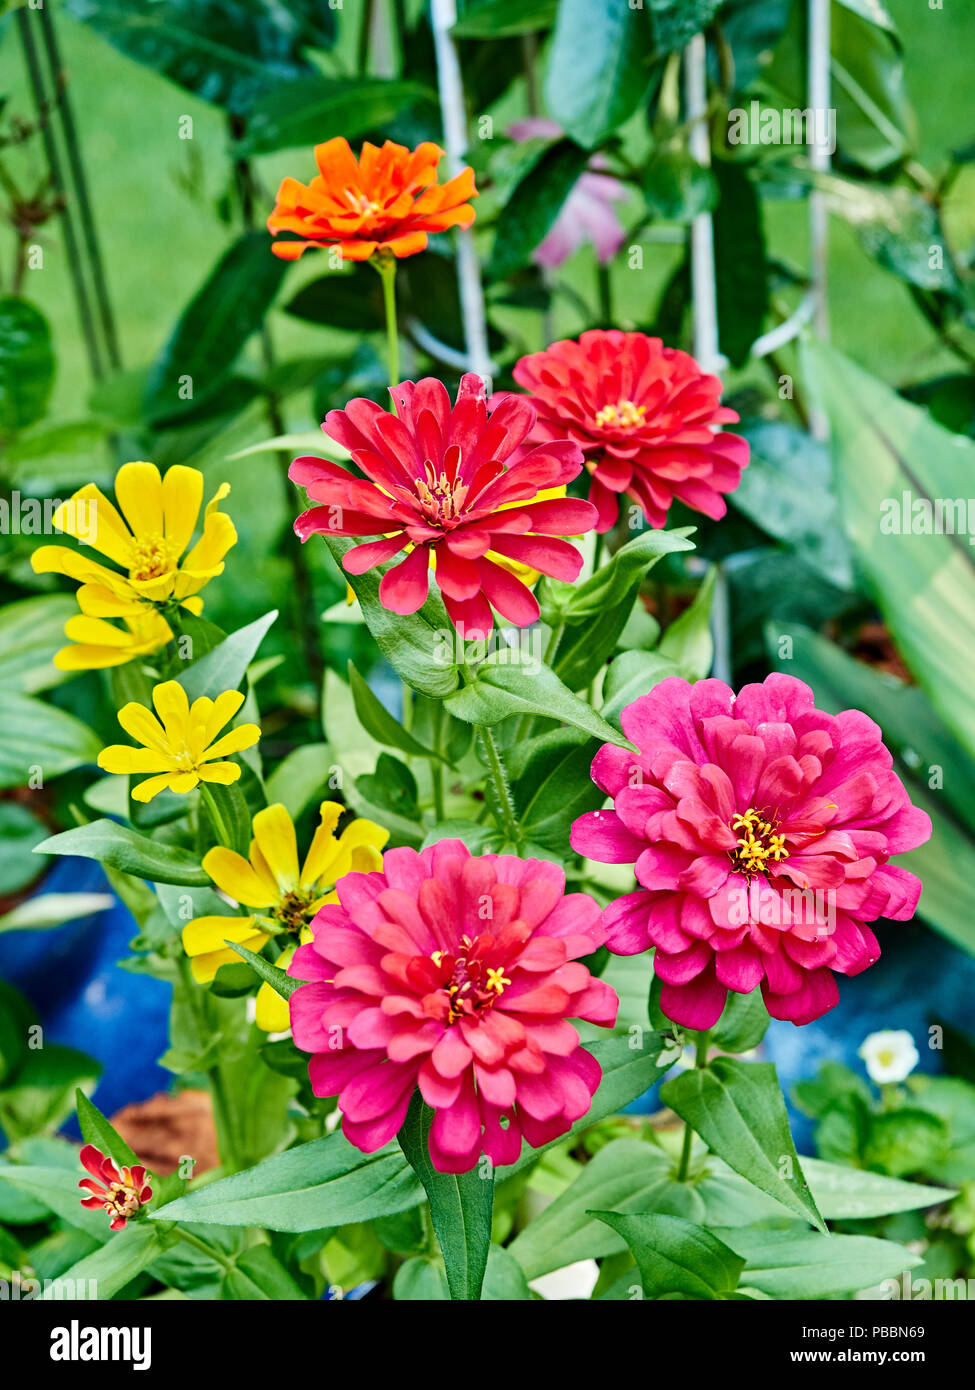 Close up of colorful zinnias or, zinnia flowers, in a patio garden with colors of red, pink and yellow. Stock Photo